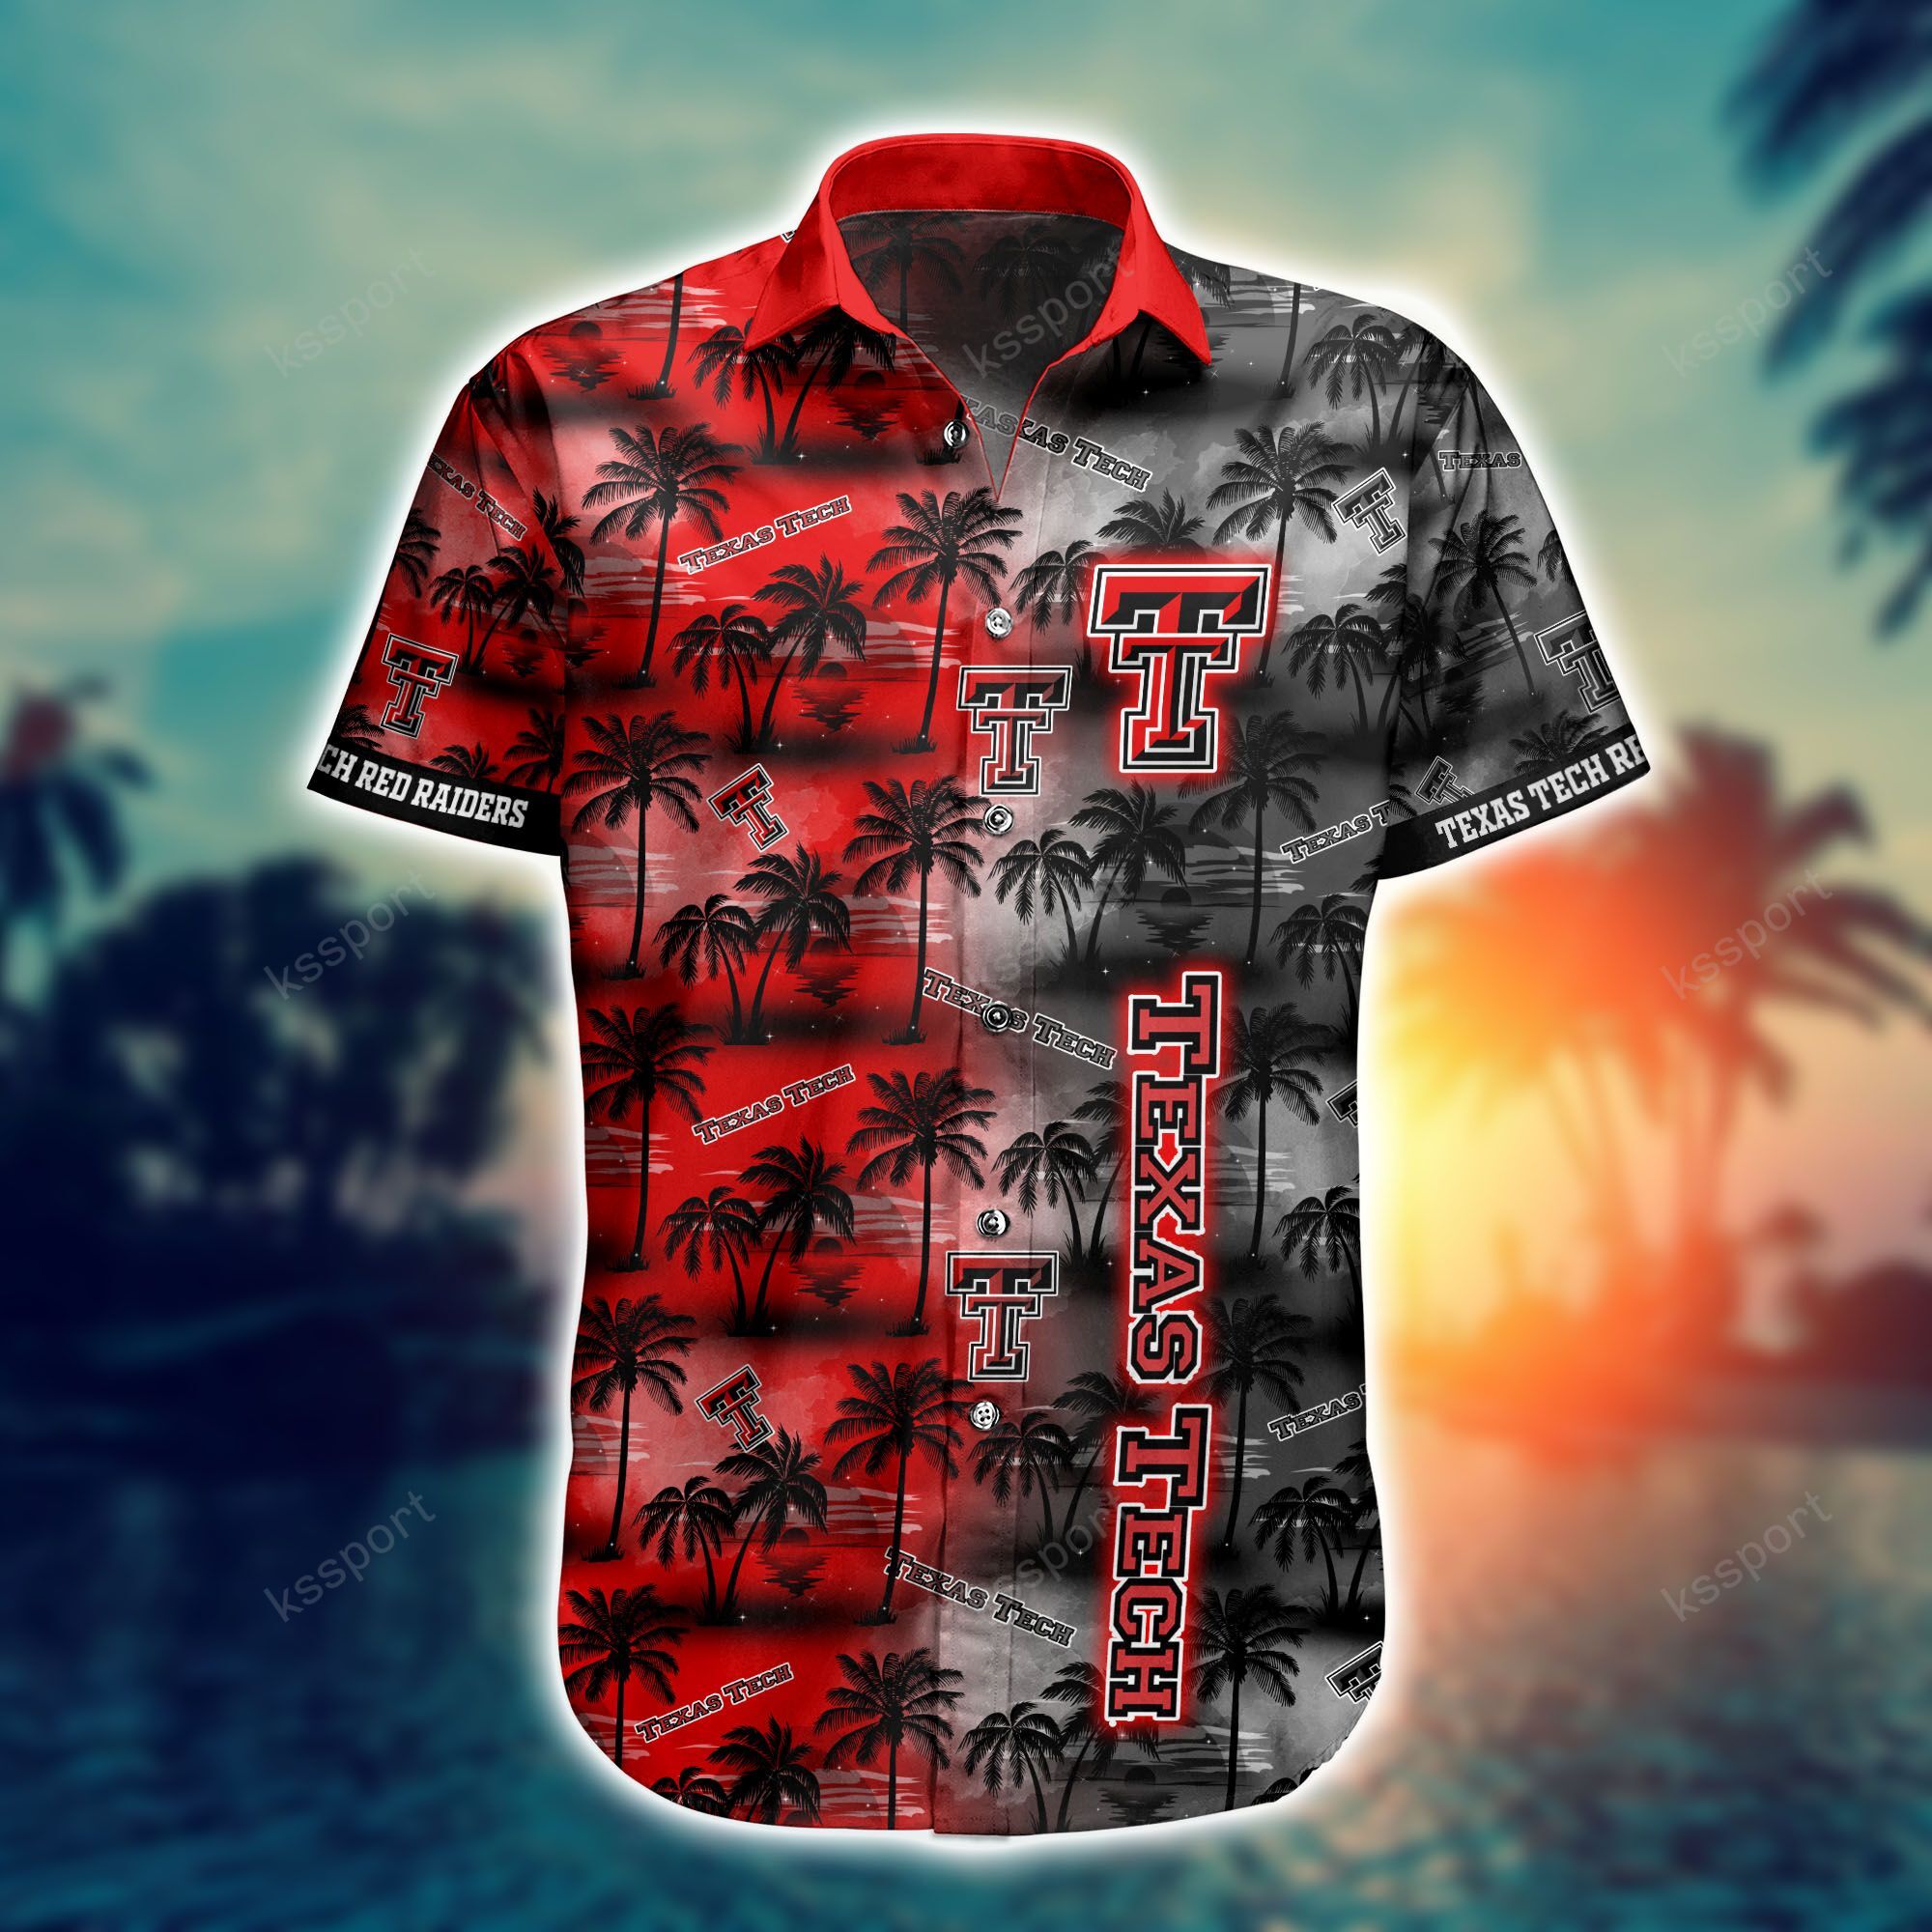 Top cool Hawaiian shirt 2022 - Make sure you get yours today before they run out! 178